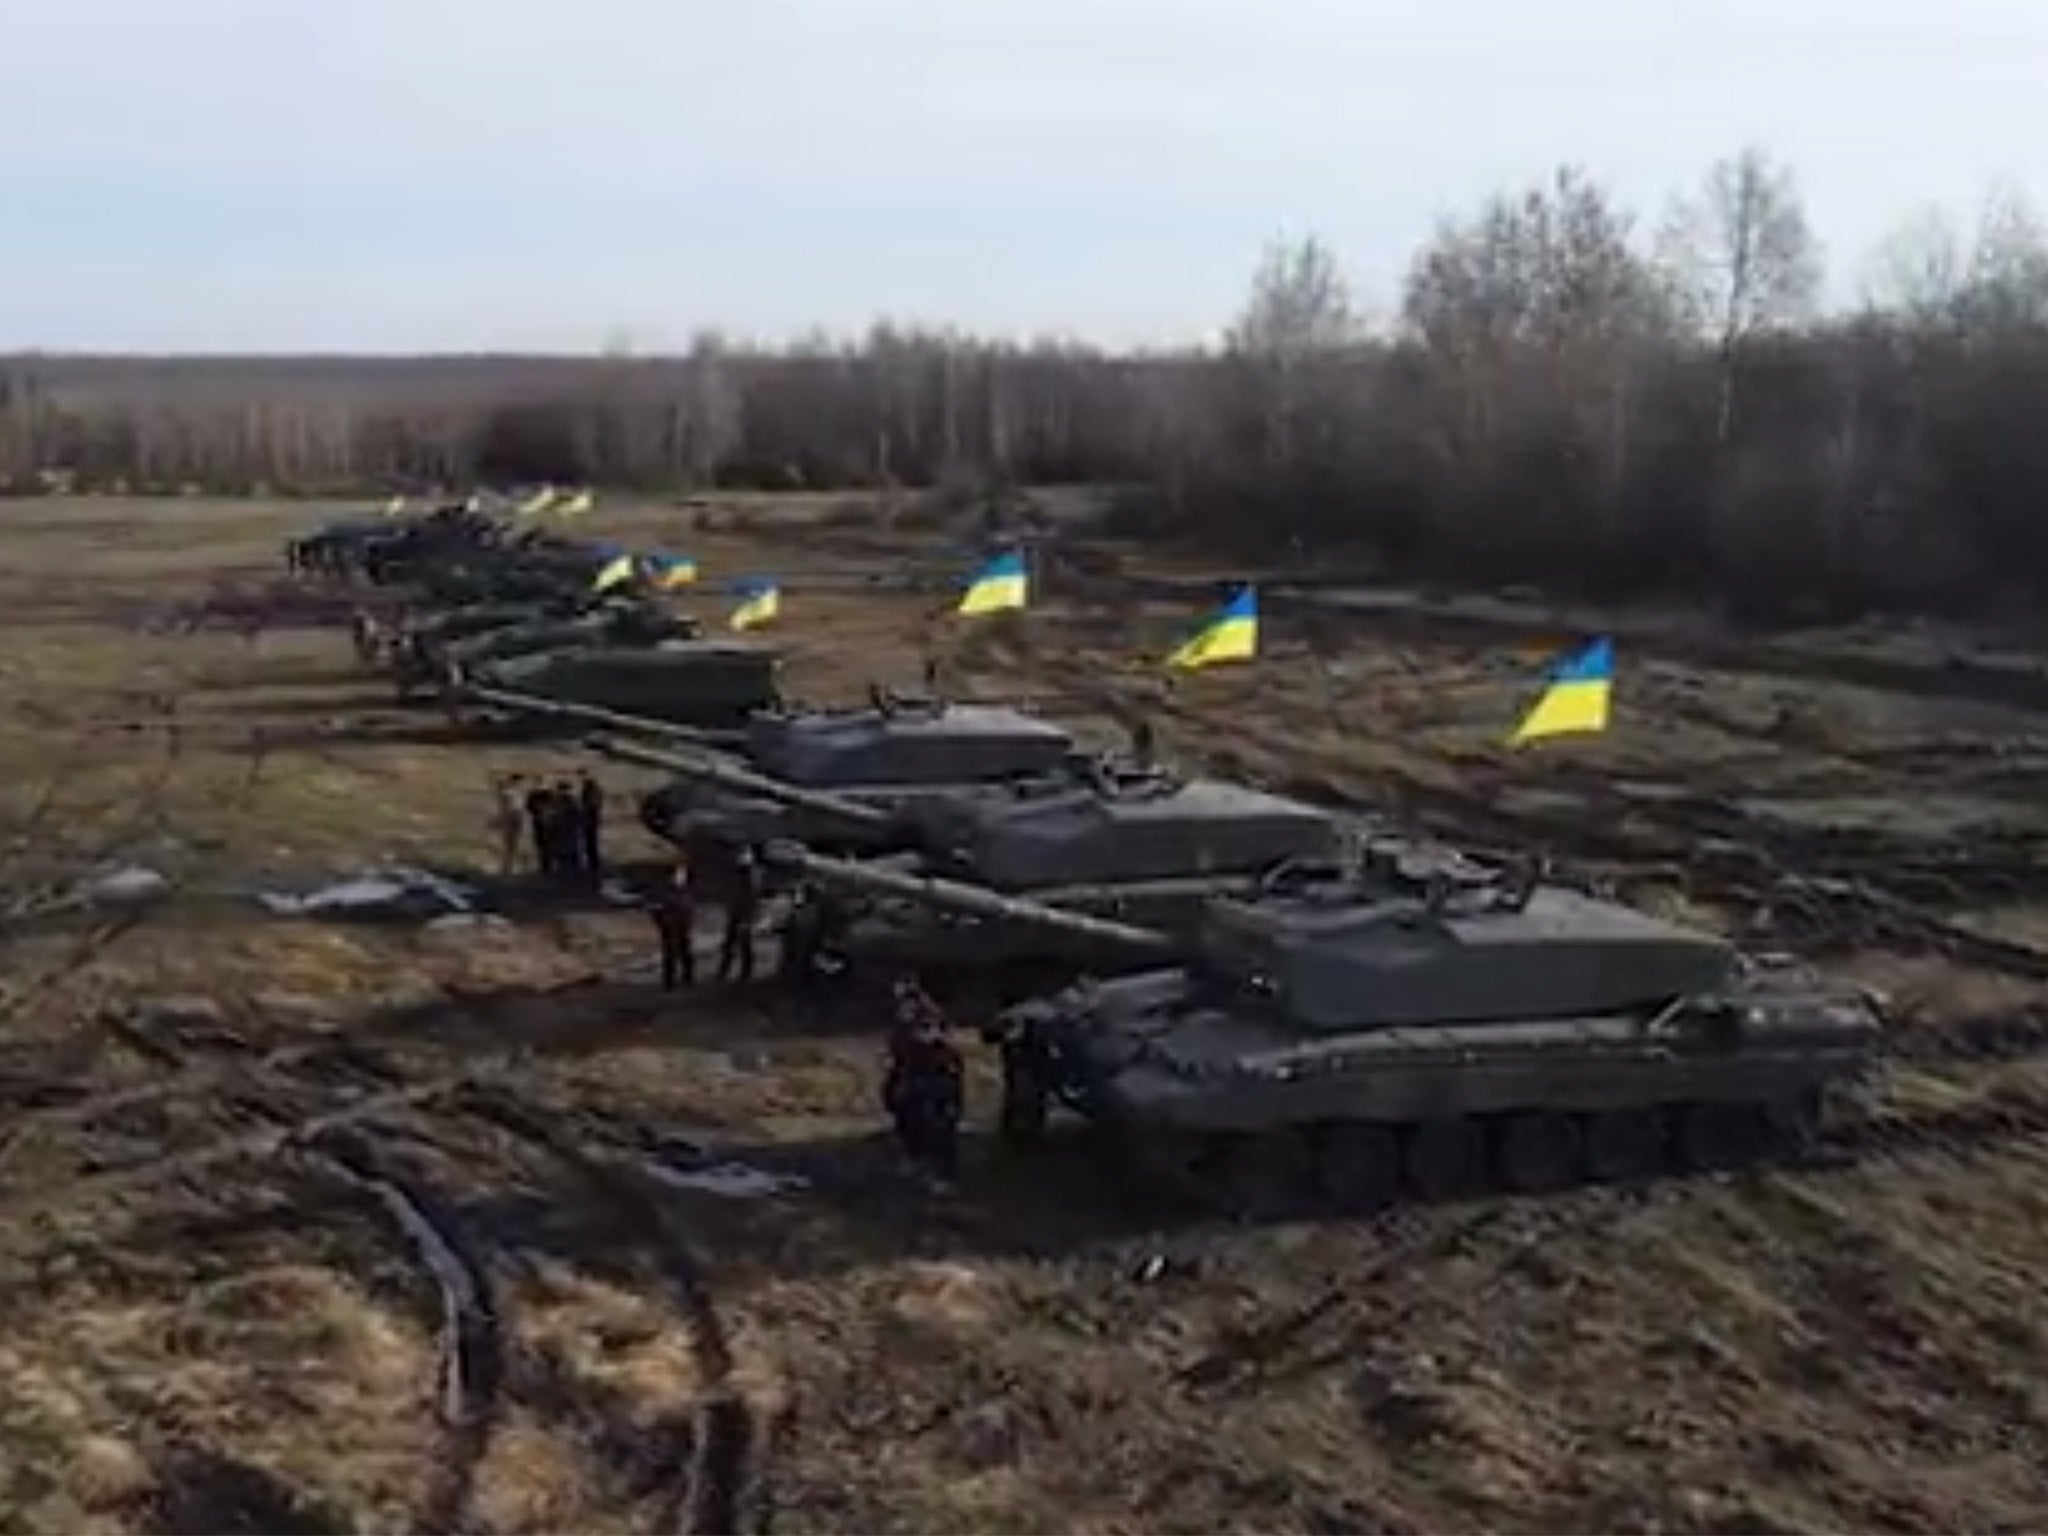 What the Leopard 2 tank could mean for Ukraine's fight against Russia